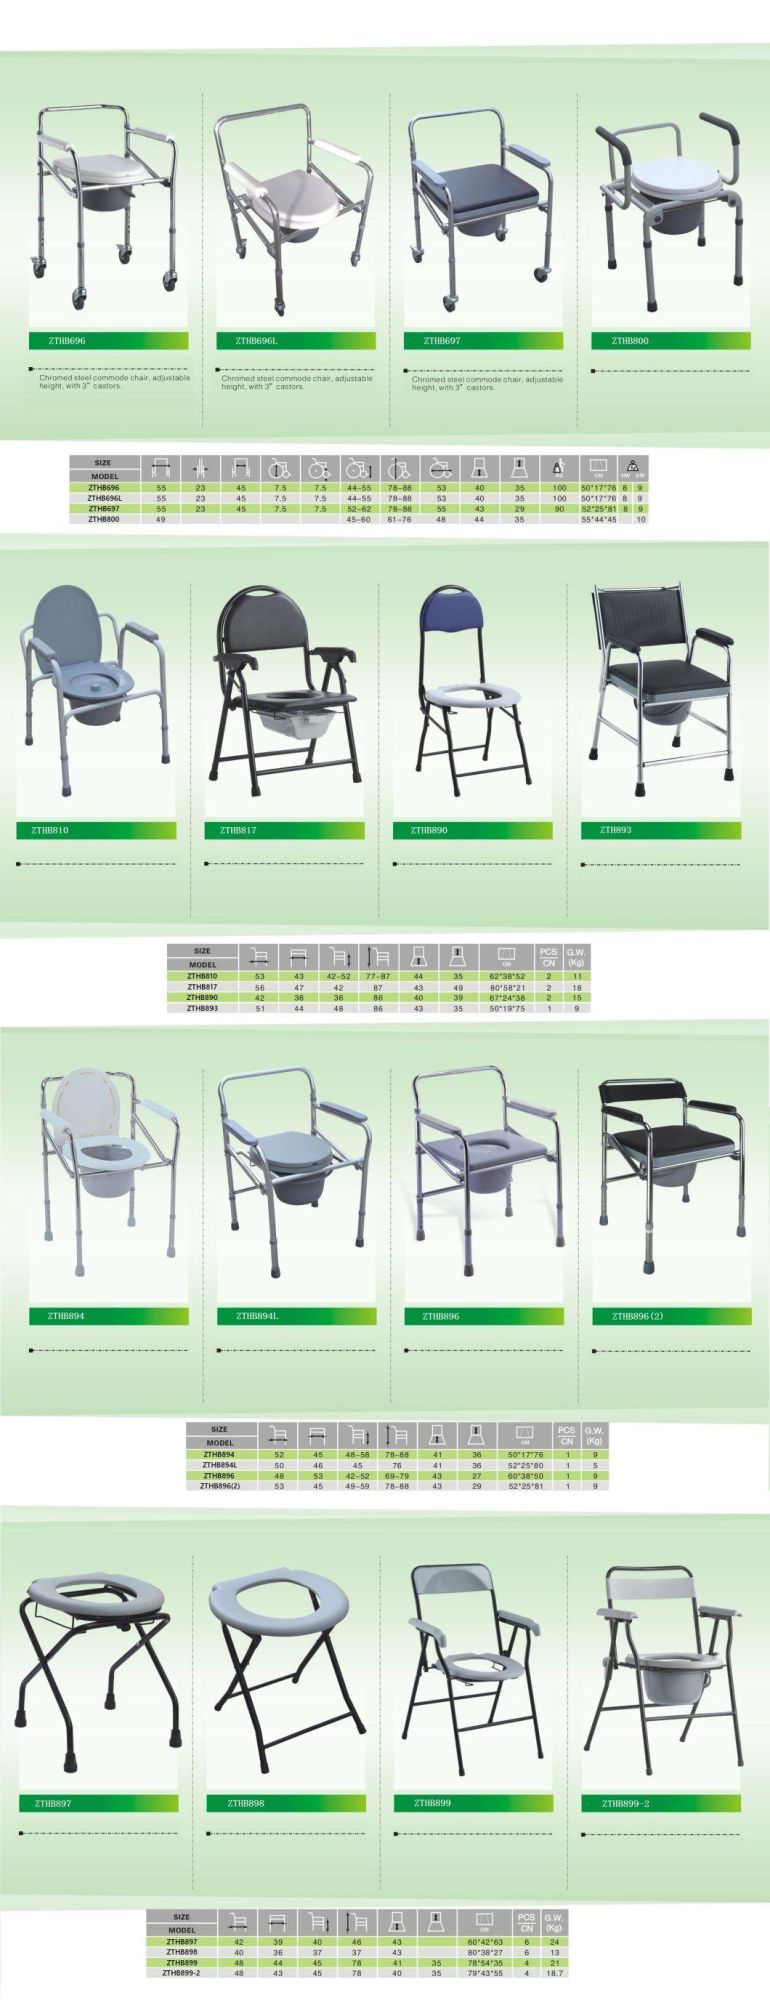 Zthl608 Apparatus Steel Aluminum Alloy Folding Electric OEM Customized Manual Disabled Light Elderly Accessibilitymotion Factory or Wheelchair